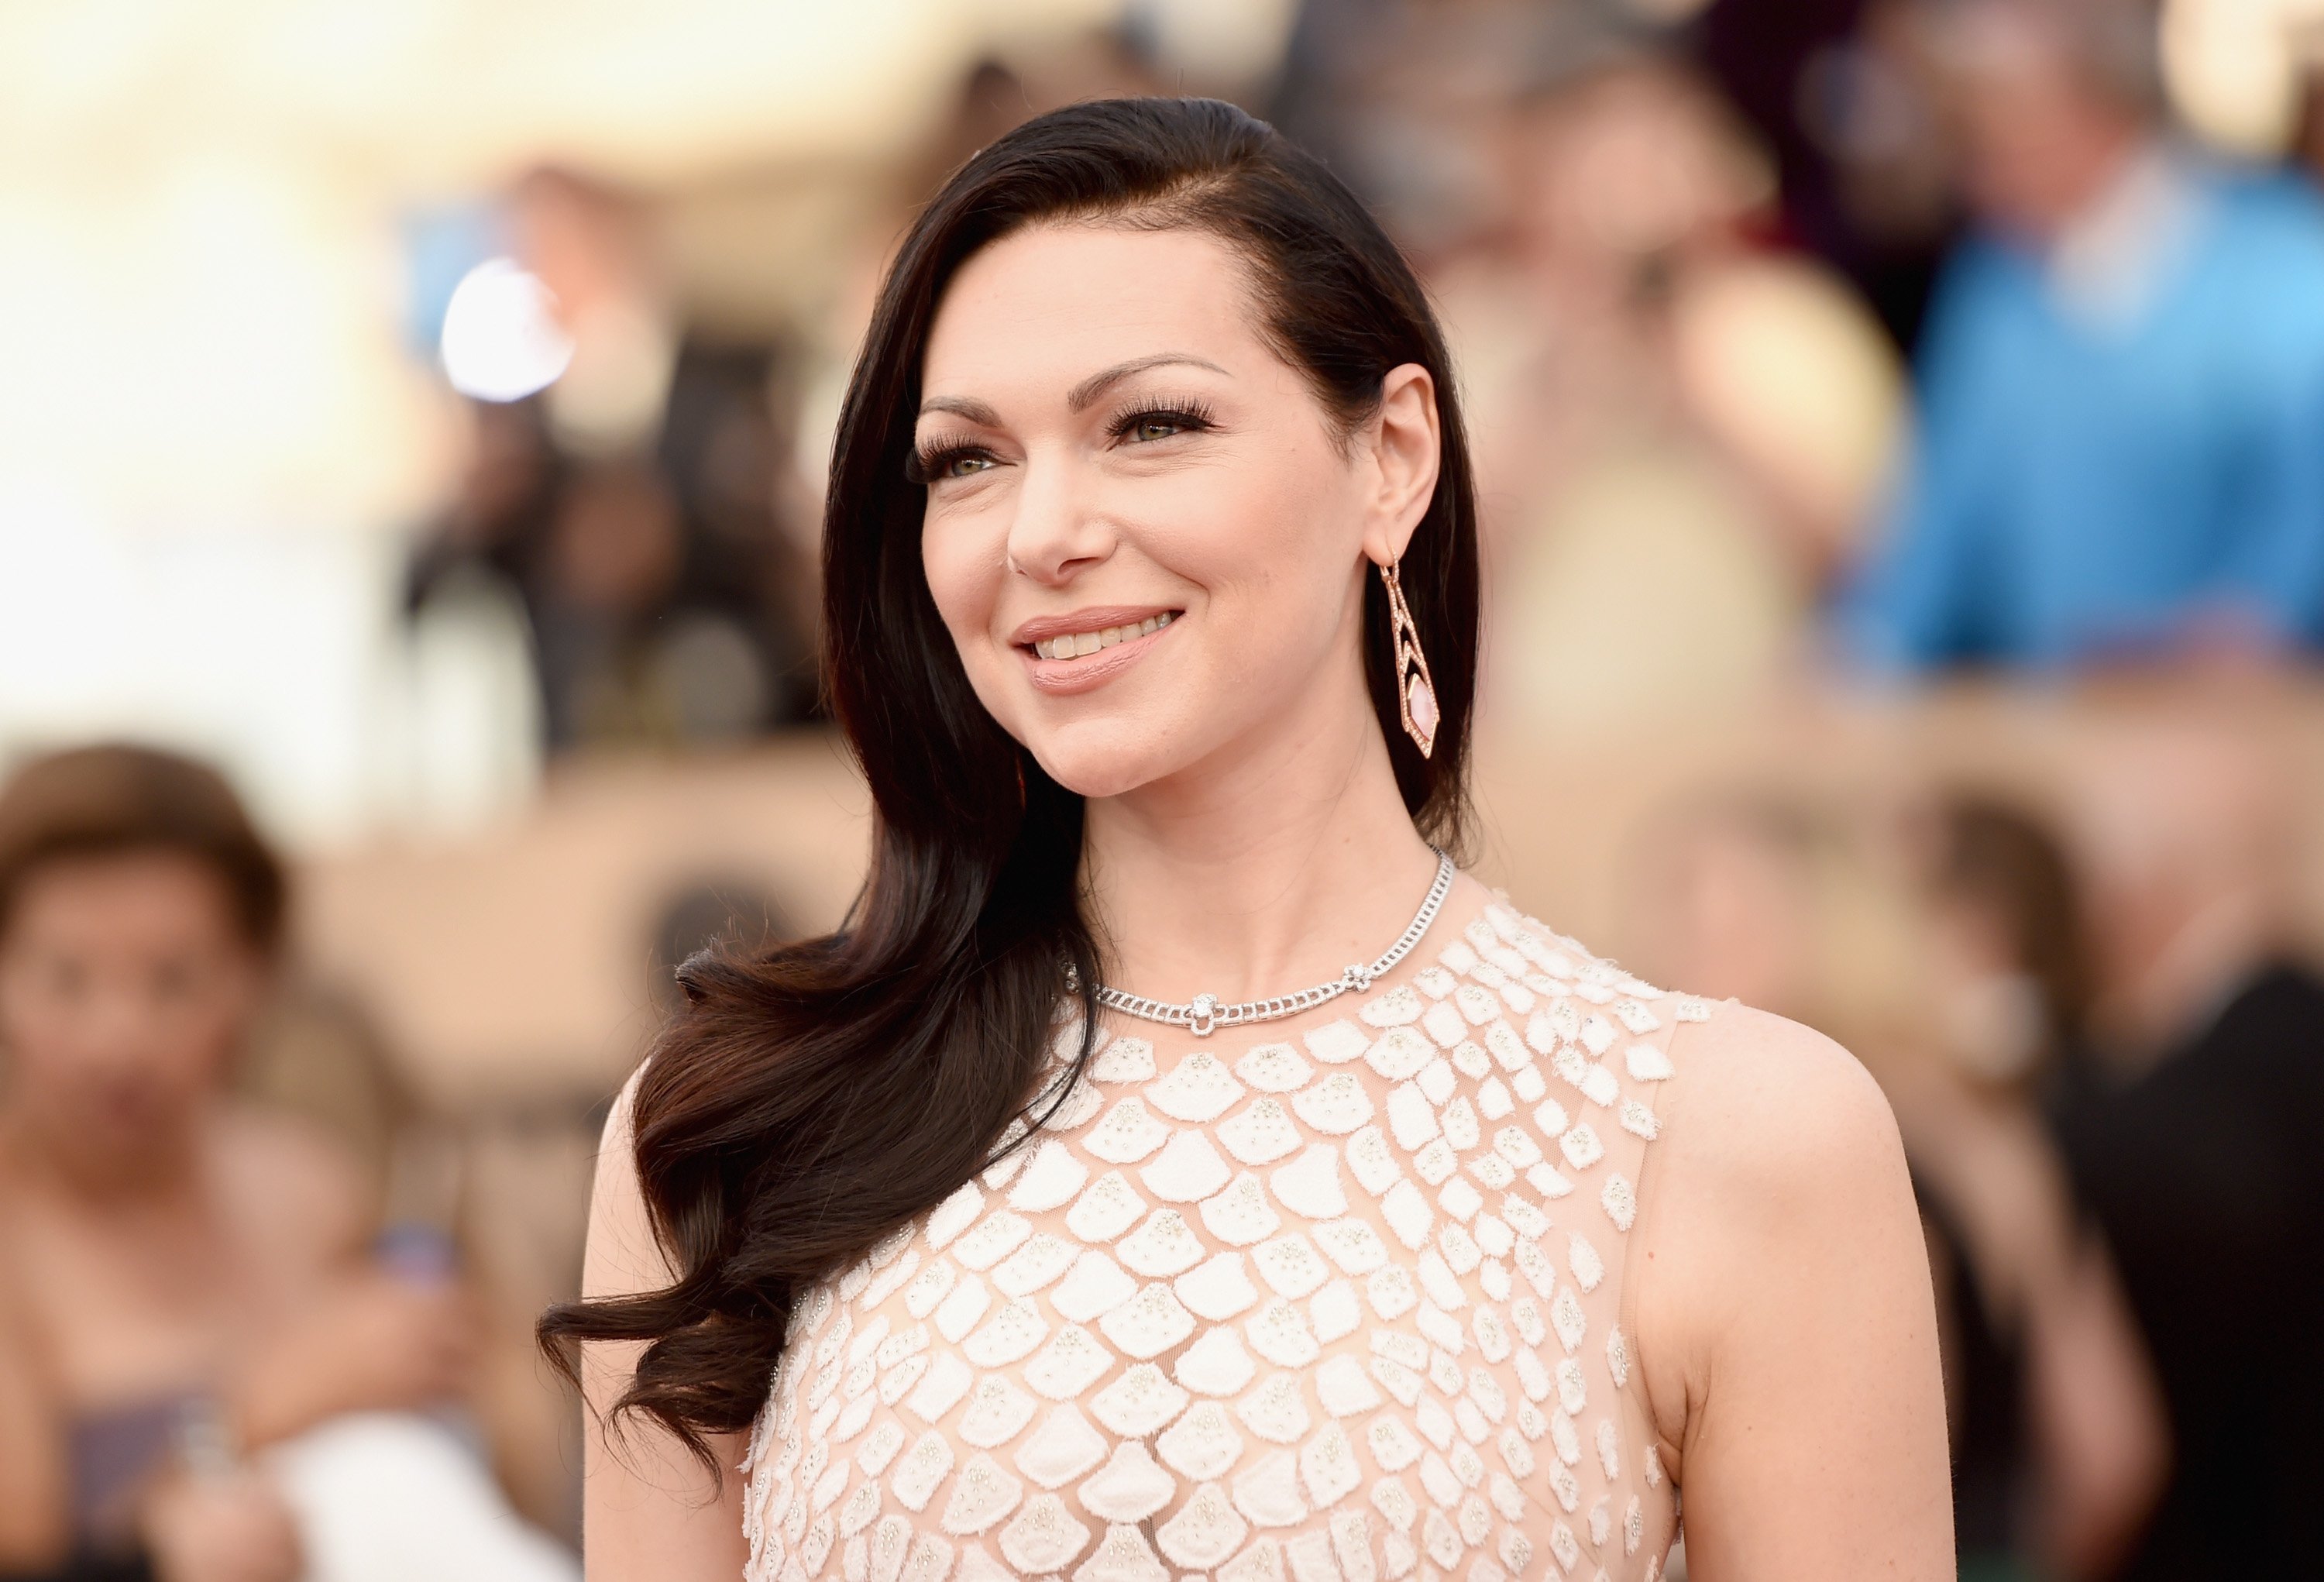 Laura Prepon attends The 22nd Annual Screen Actors Guild Awards at The Shrine Auditorium on January 30, 2016. | Photo: GettyImages